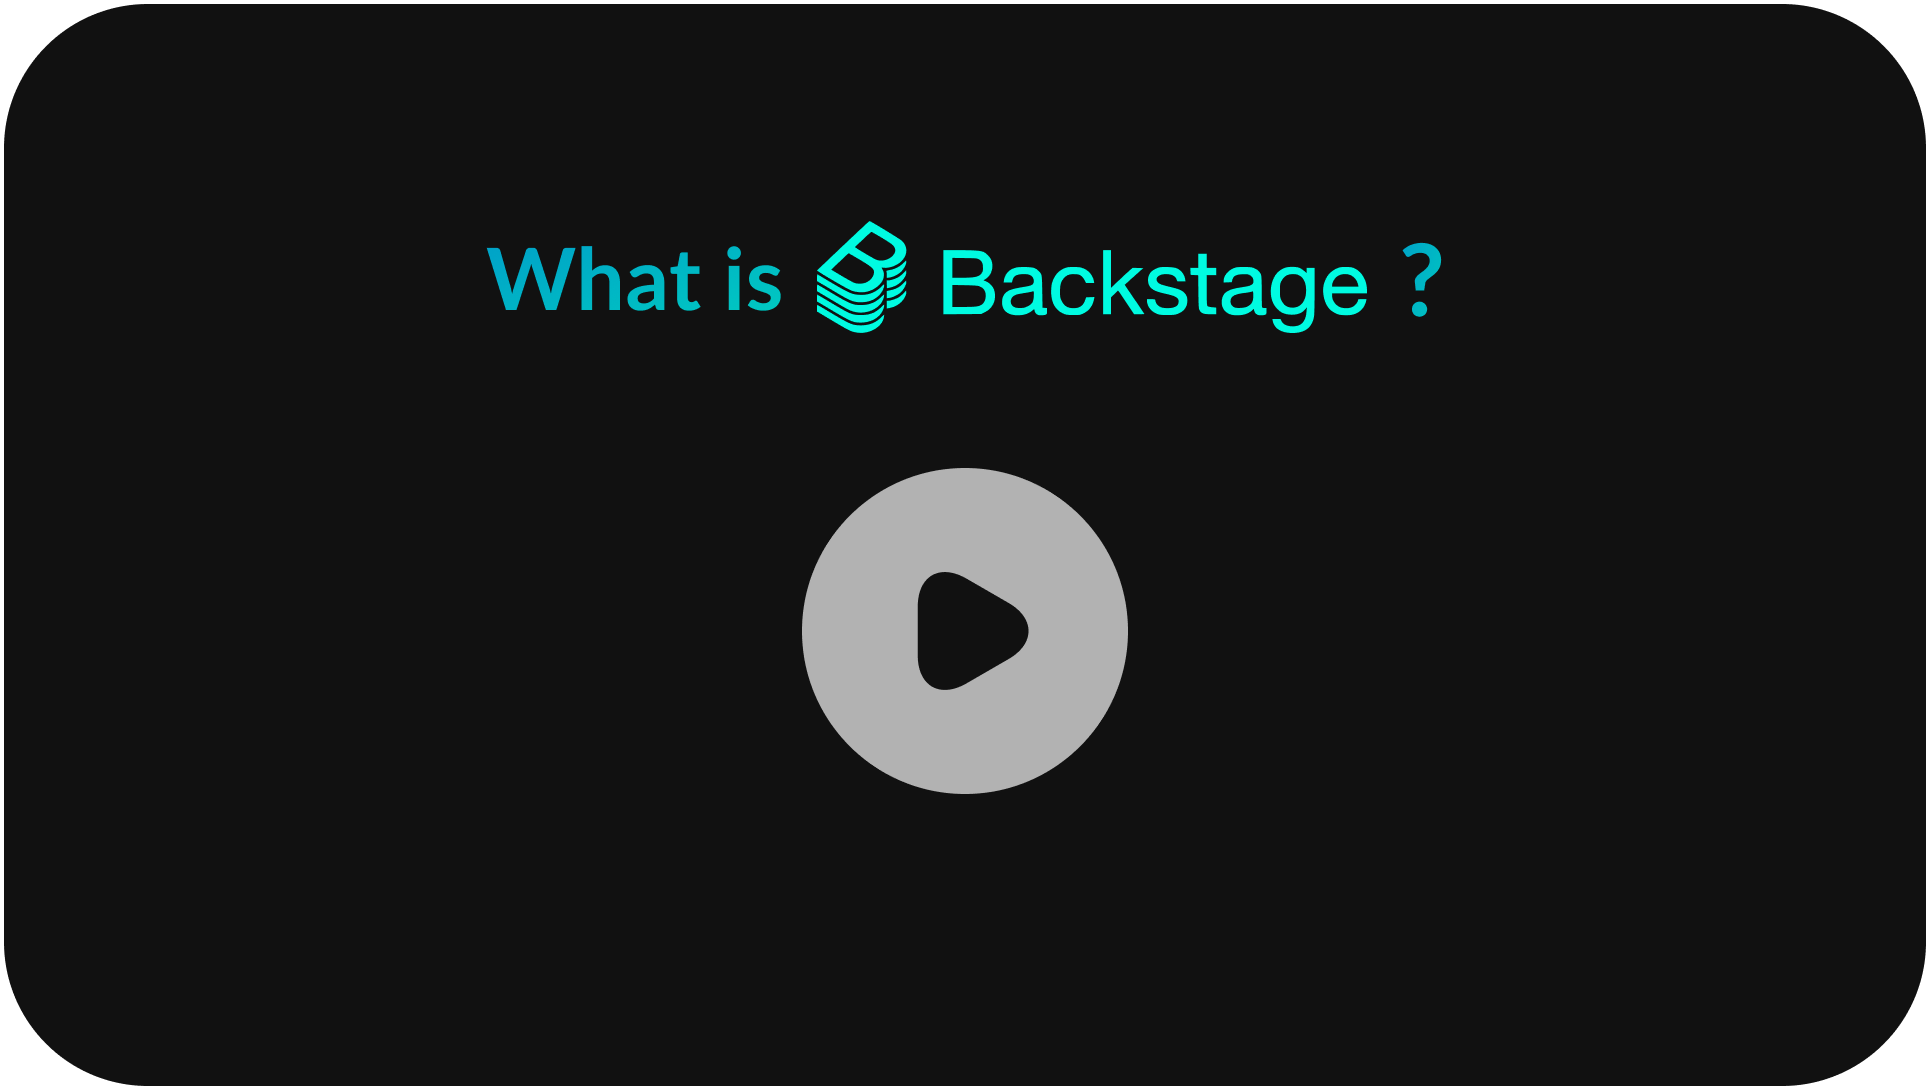 What is Backstage_ (Explainer Video) 1